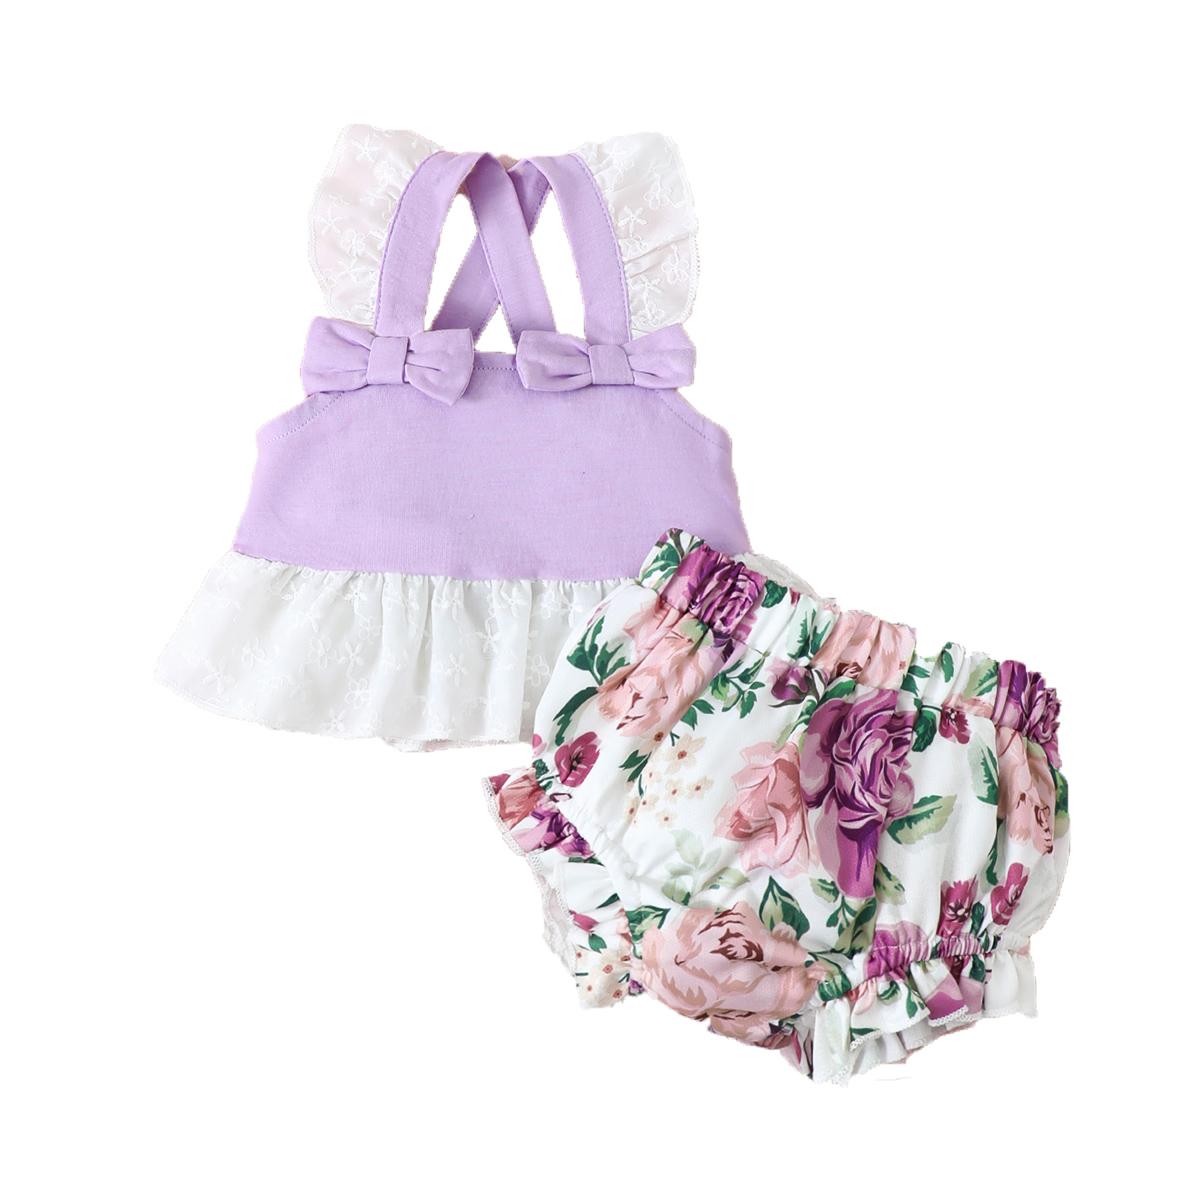 6M-3Y Ready Stock Baby Girls Summer Clothes Lace Bow Straps Tops Elastic Shorts 2pcs Outfits Purple Catpapa GS112211302